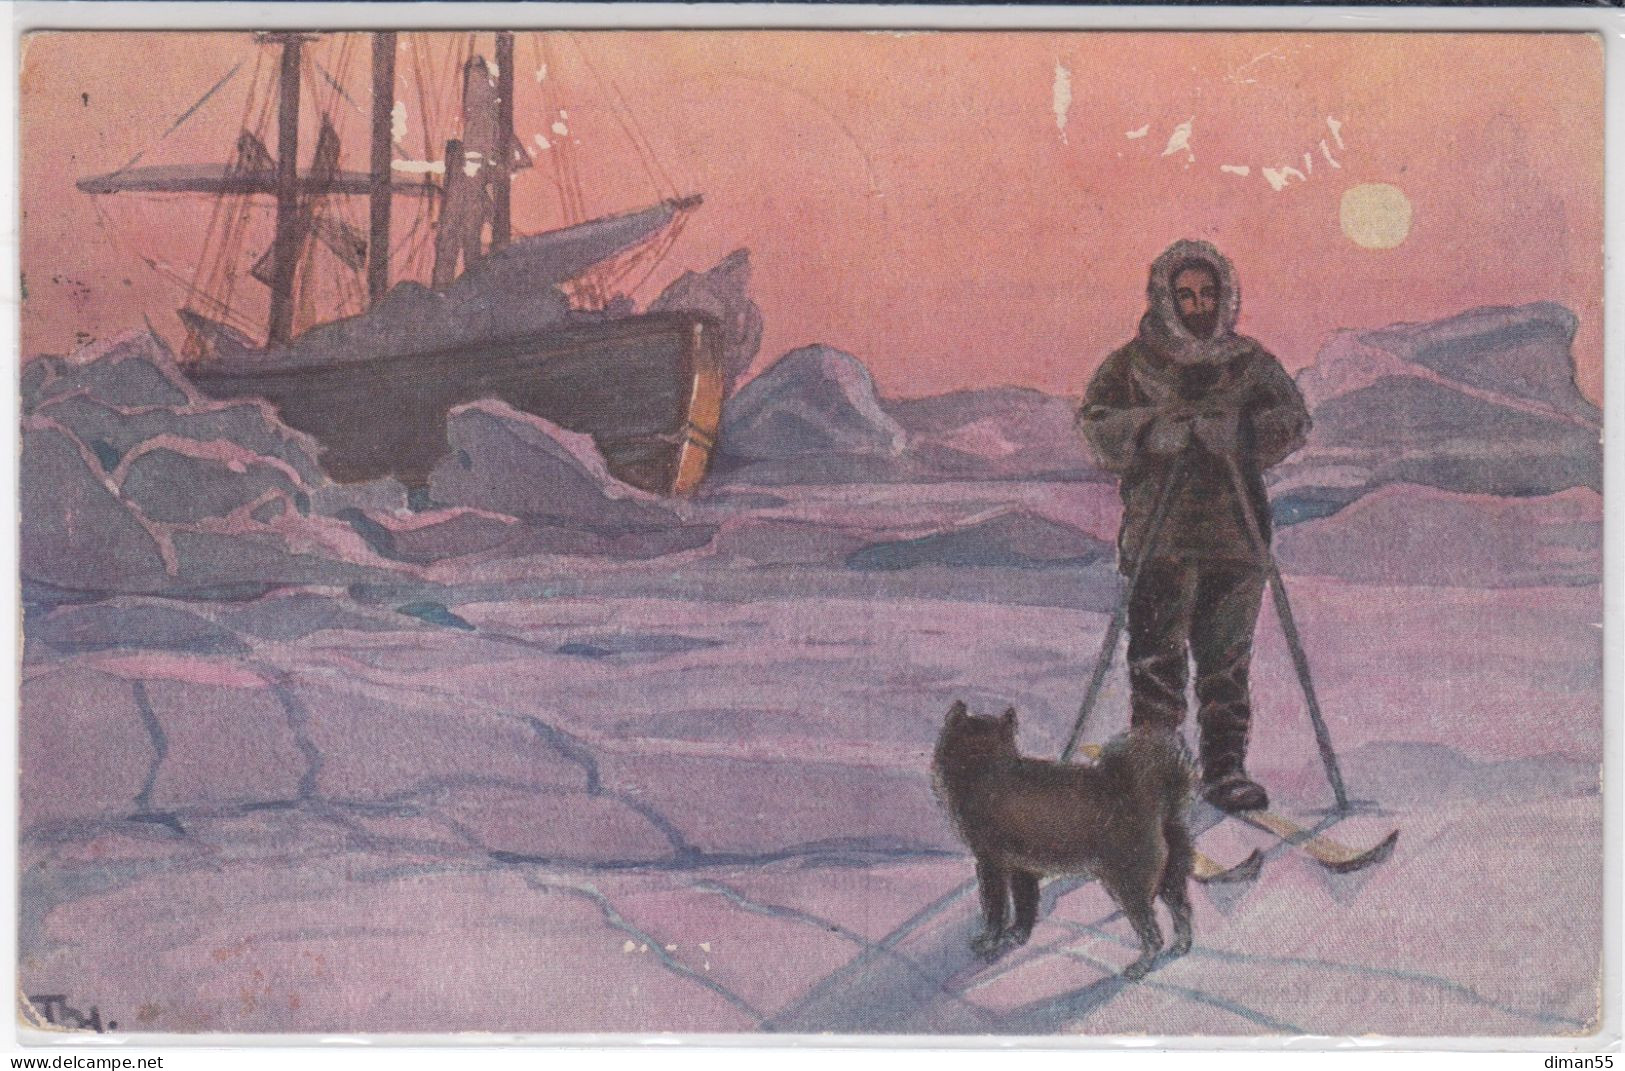 NORWAY - POLAR CRUISE - POLHAVET 4-8-1924 POSTAL CARD - Very Rare And HV - Lettres & Documents